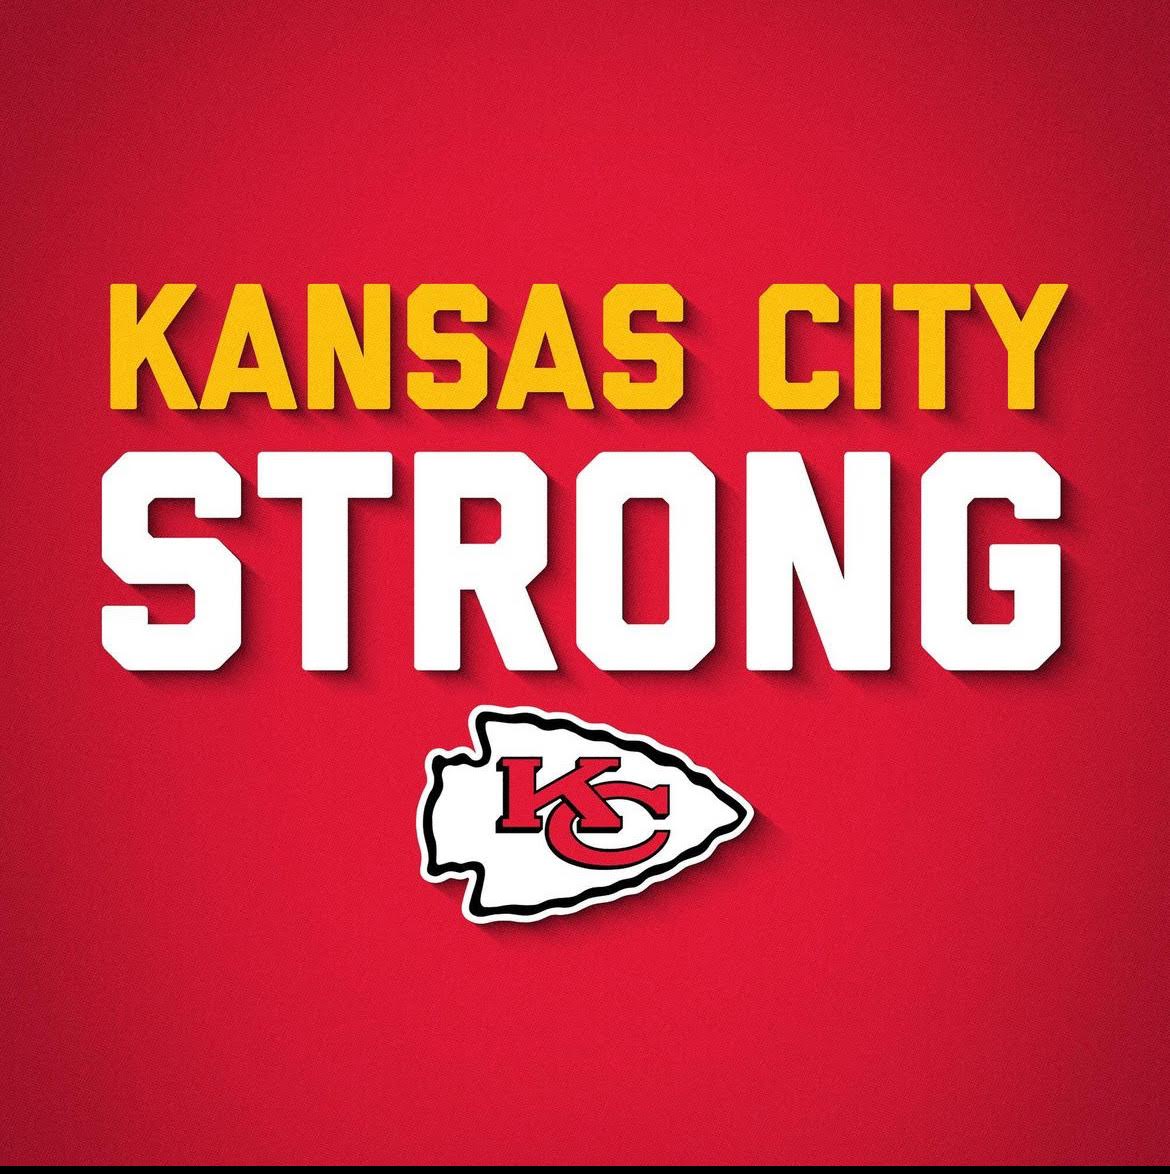 Kansas+City+Chiefs+post+after+the+incident+at+their+parade.